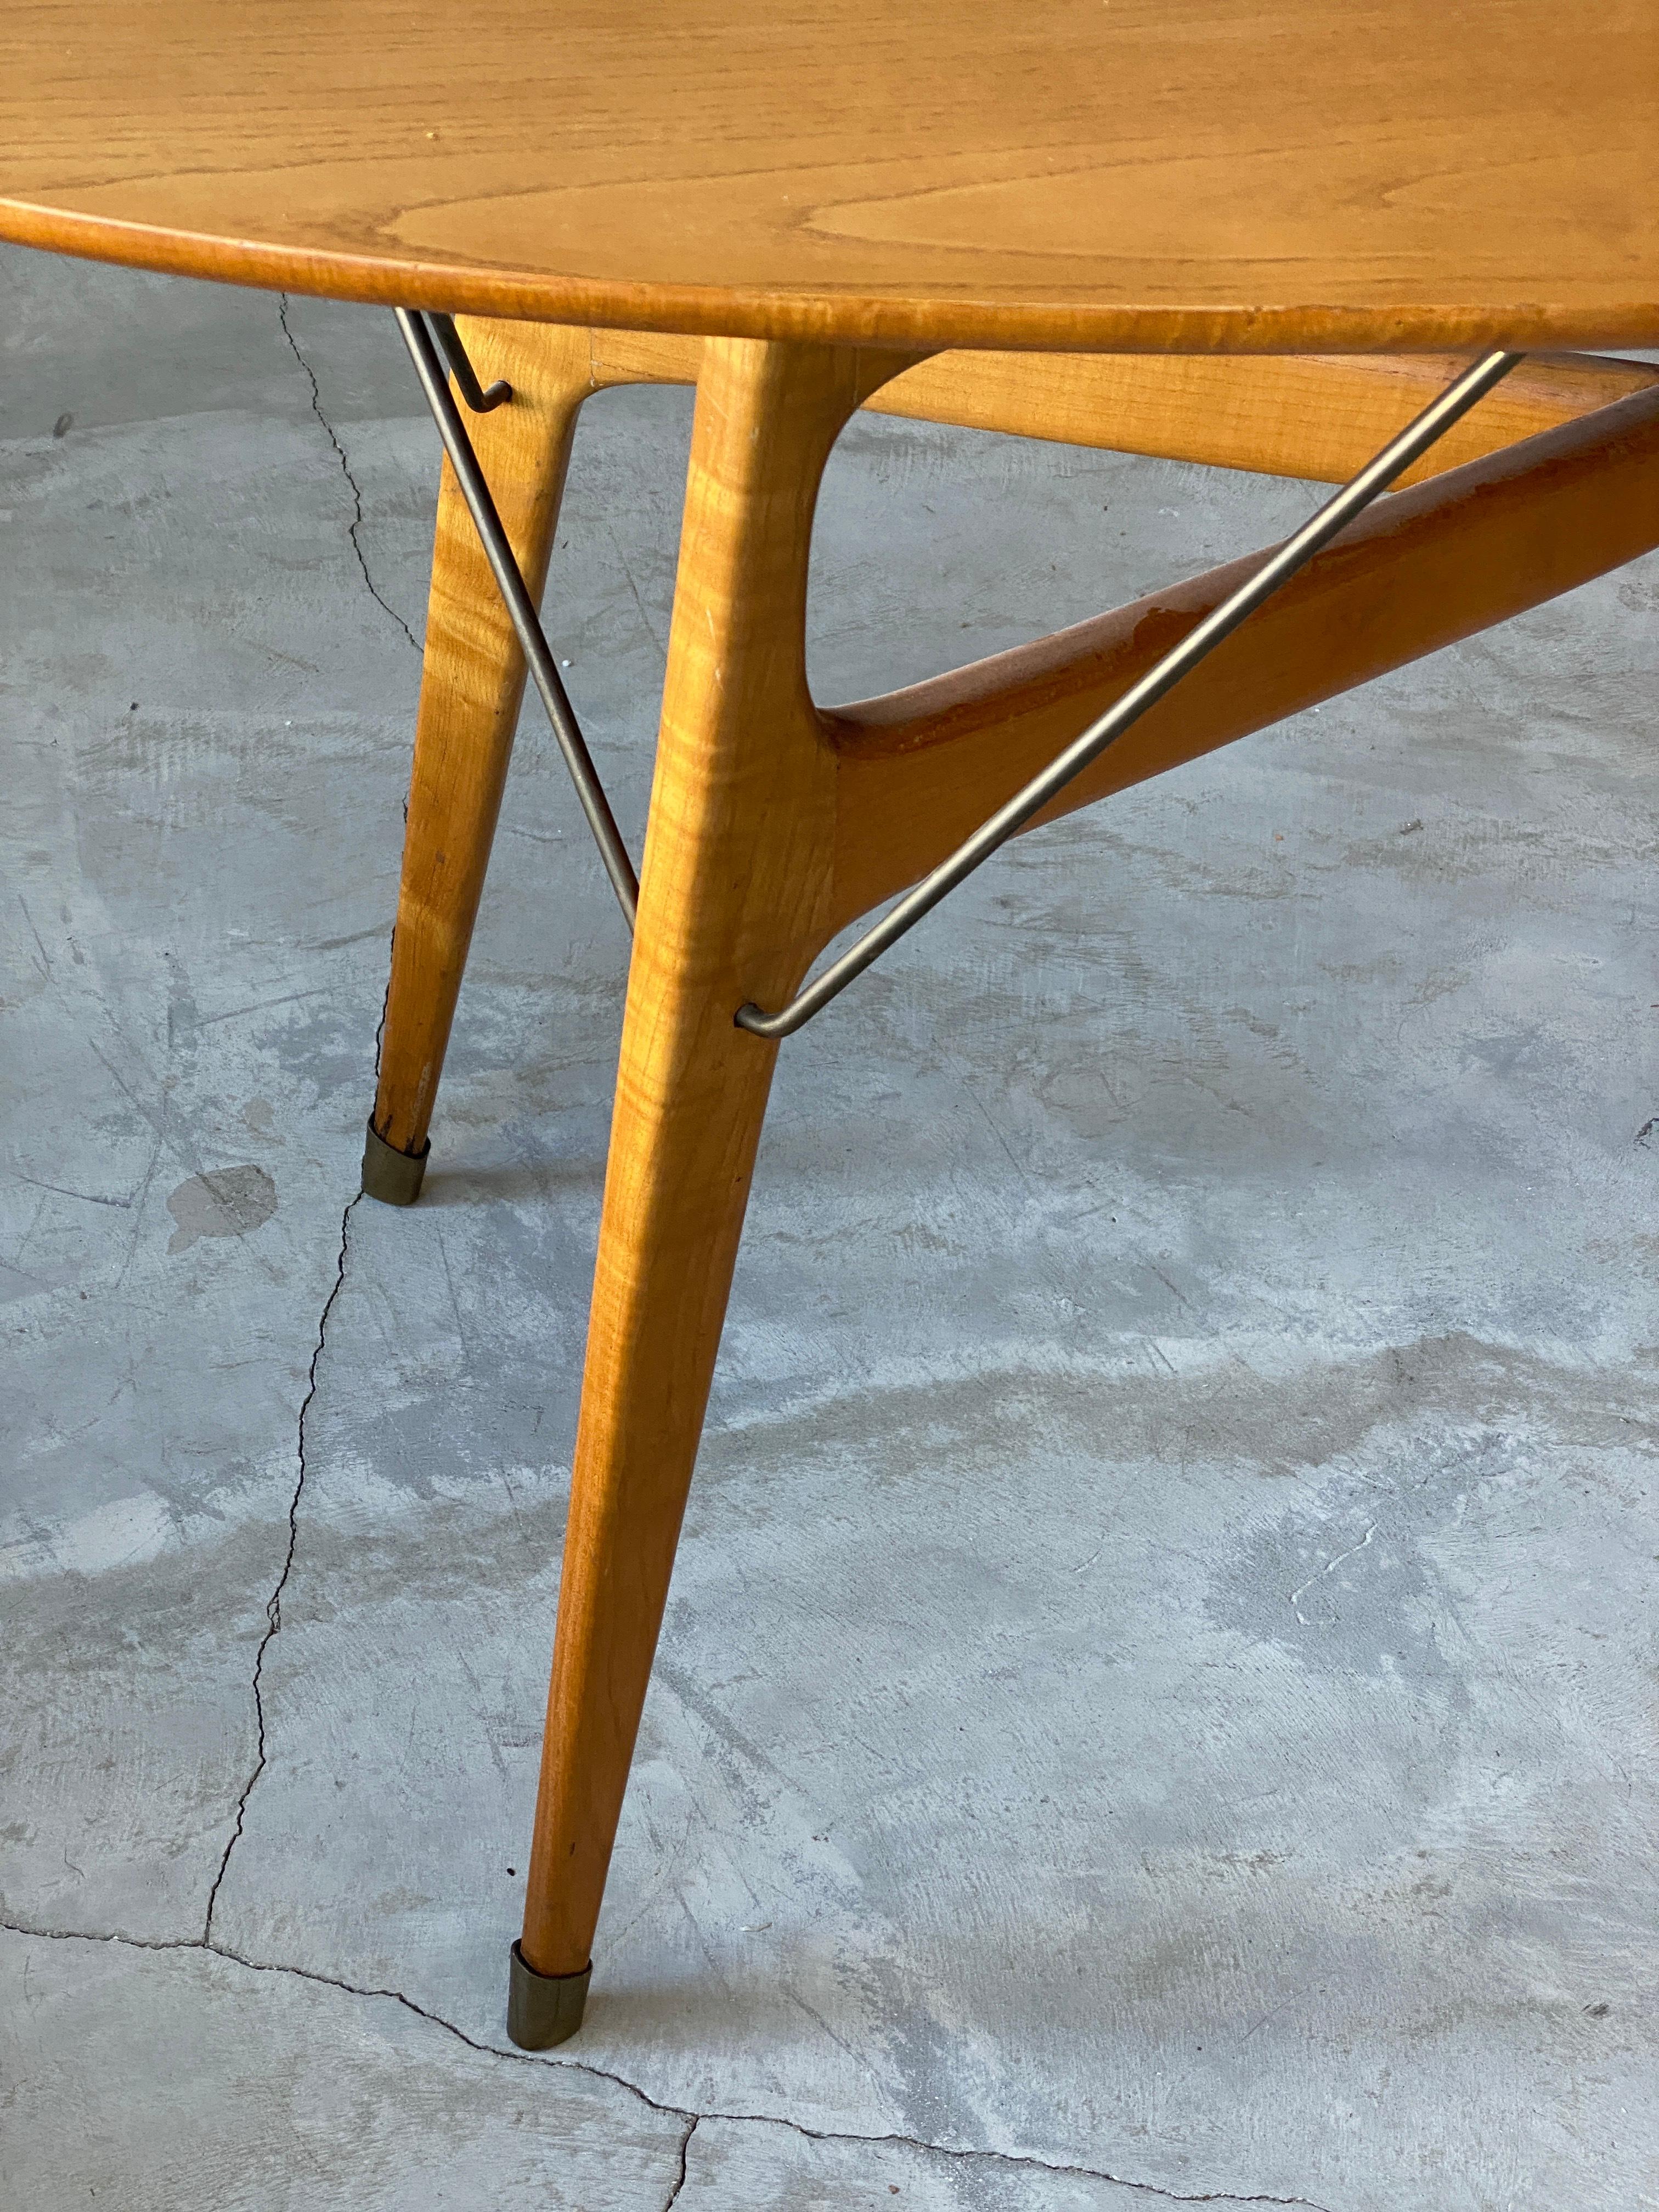 A small dinette / dining table. Finely sculpted solid beach reinforced with brass details. 

Other designers of the period include Gio Ponti, Franco Albini, Paolo Buffa, Ico Parisi, and Carlo Mollino.